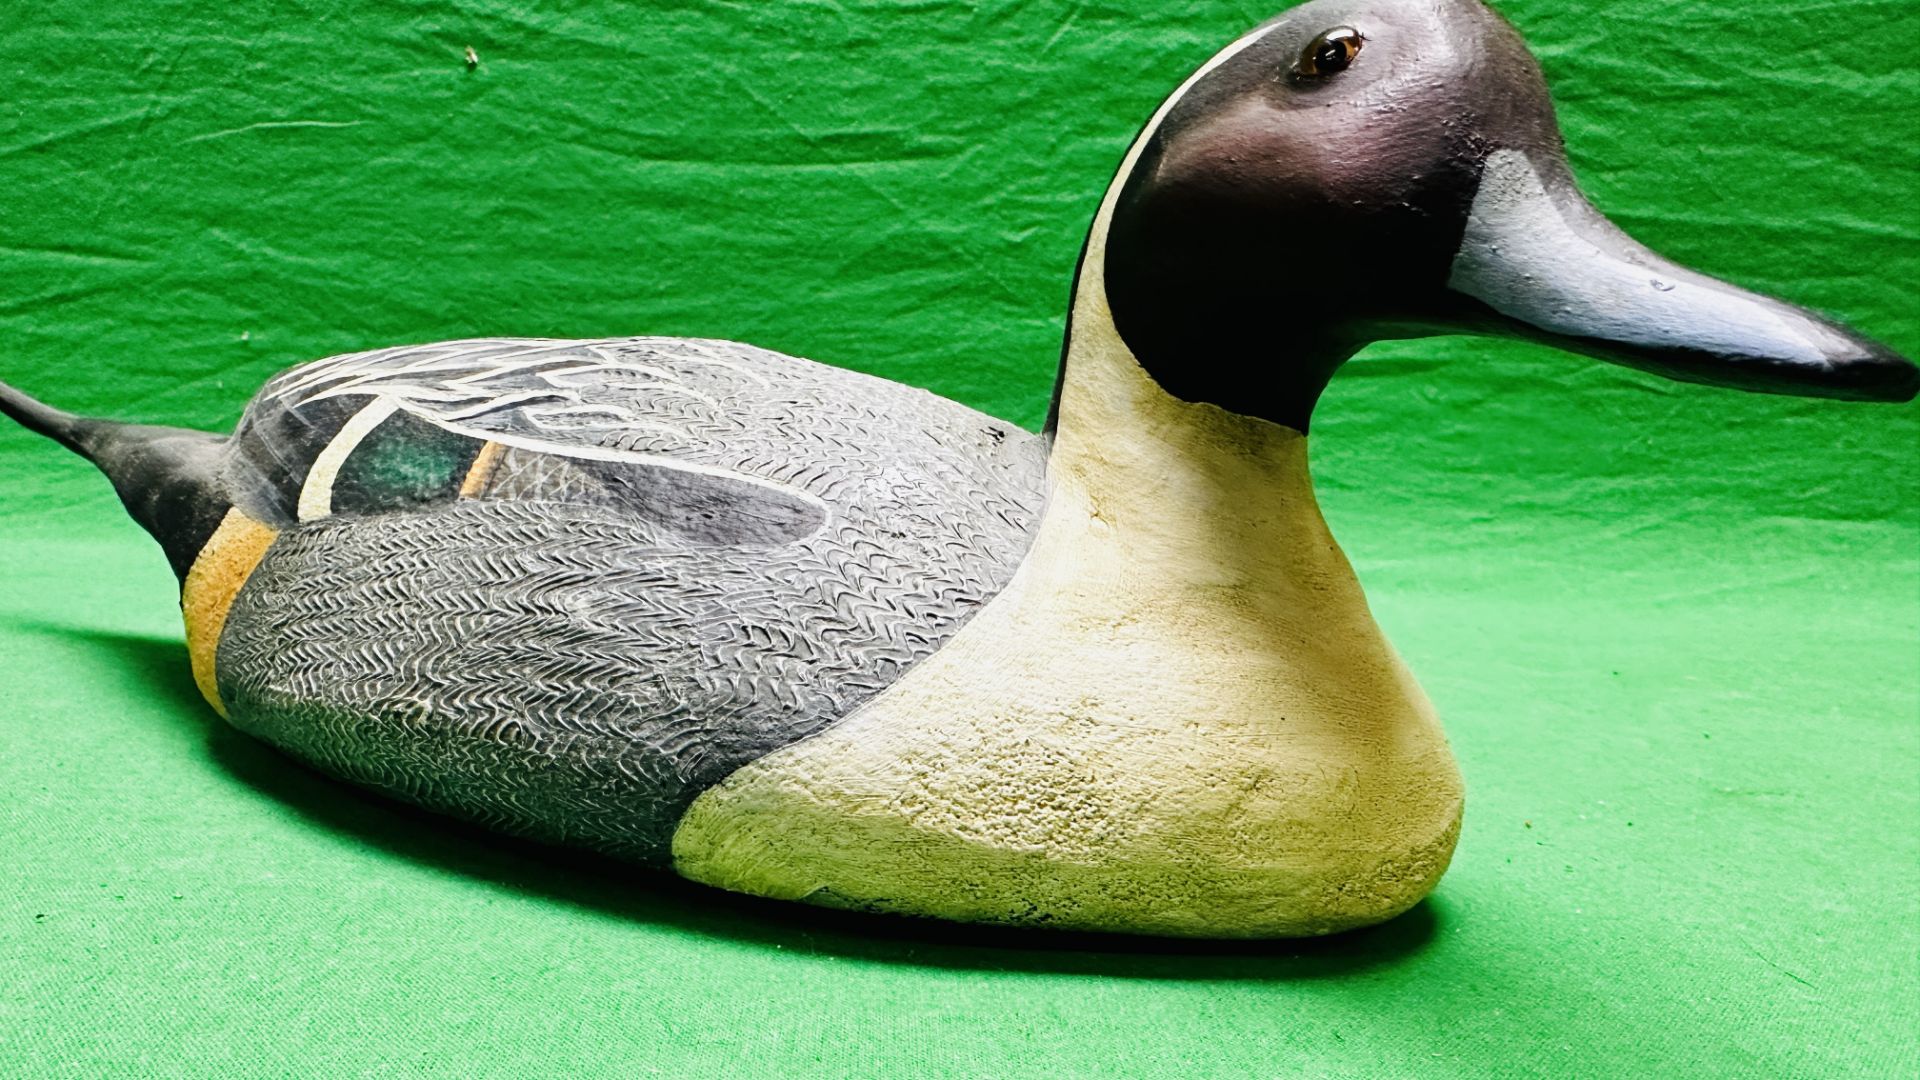 A HANDCRAFTED DUCK DECOY HAVING HANDPAINTED DETAIL AND GLASS EYES. - Image 3 of 10